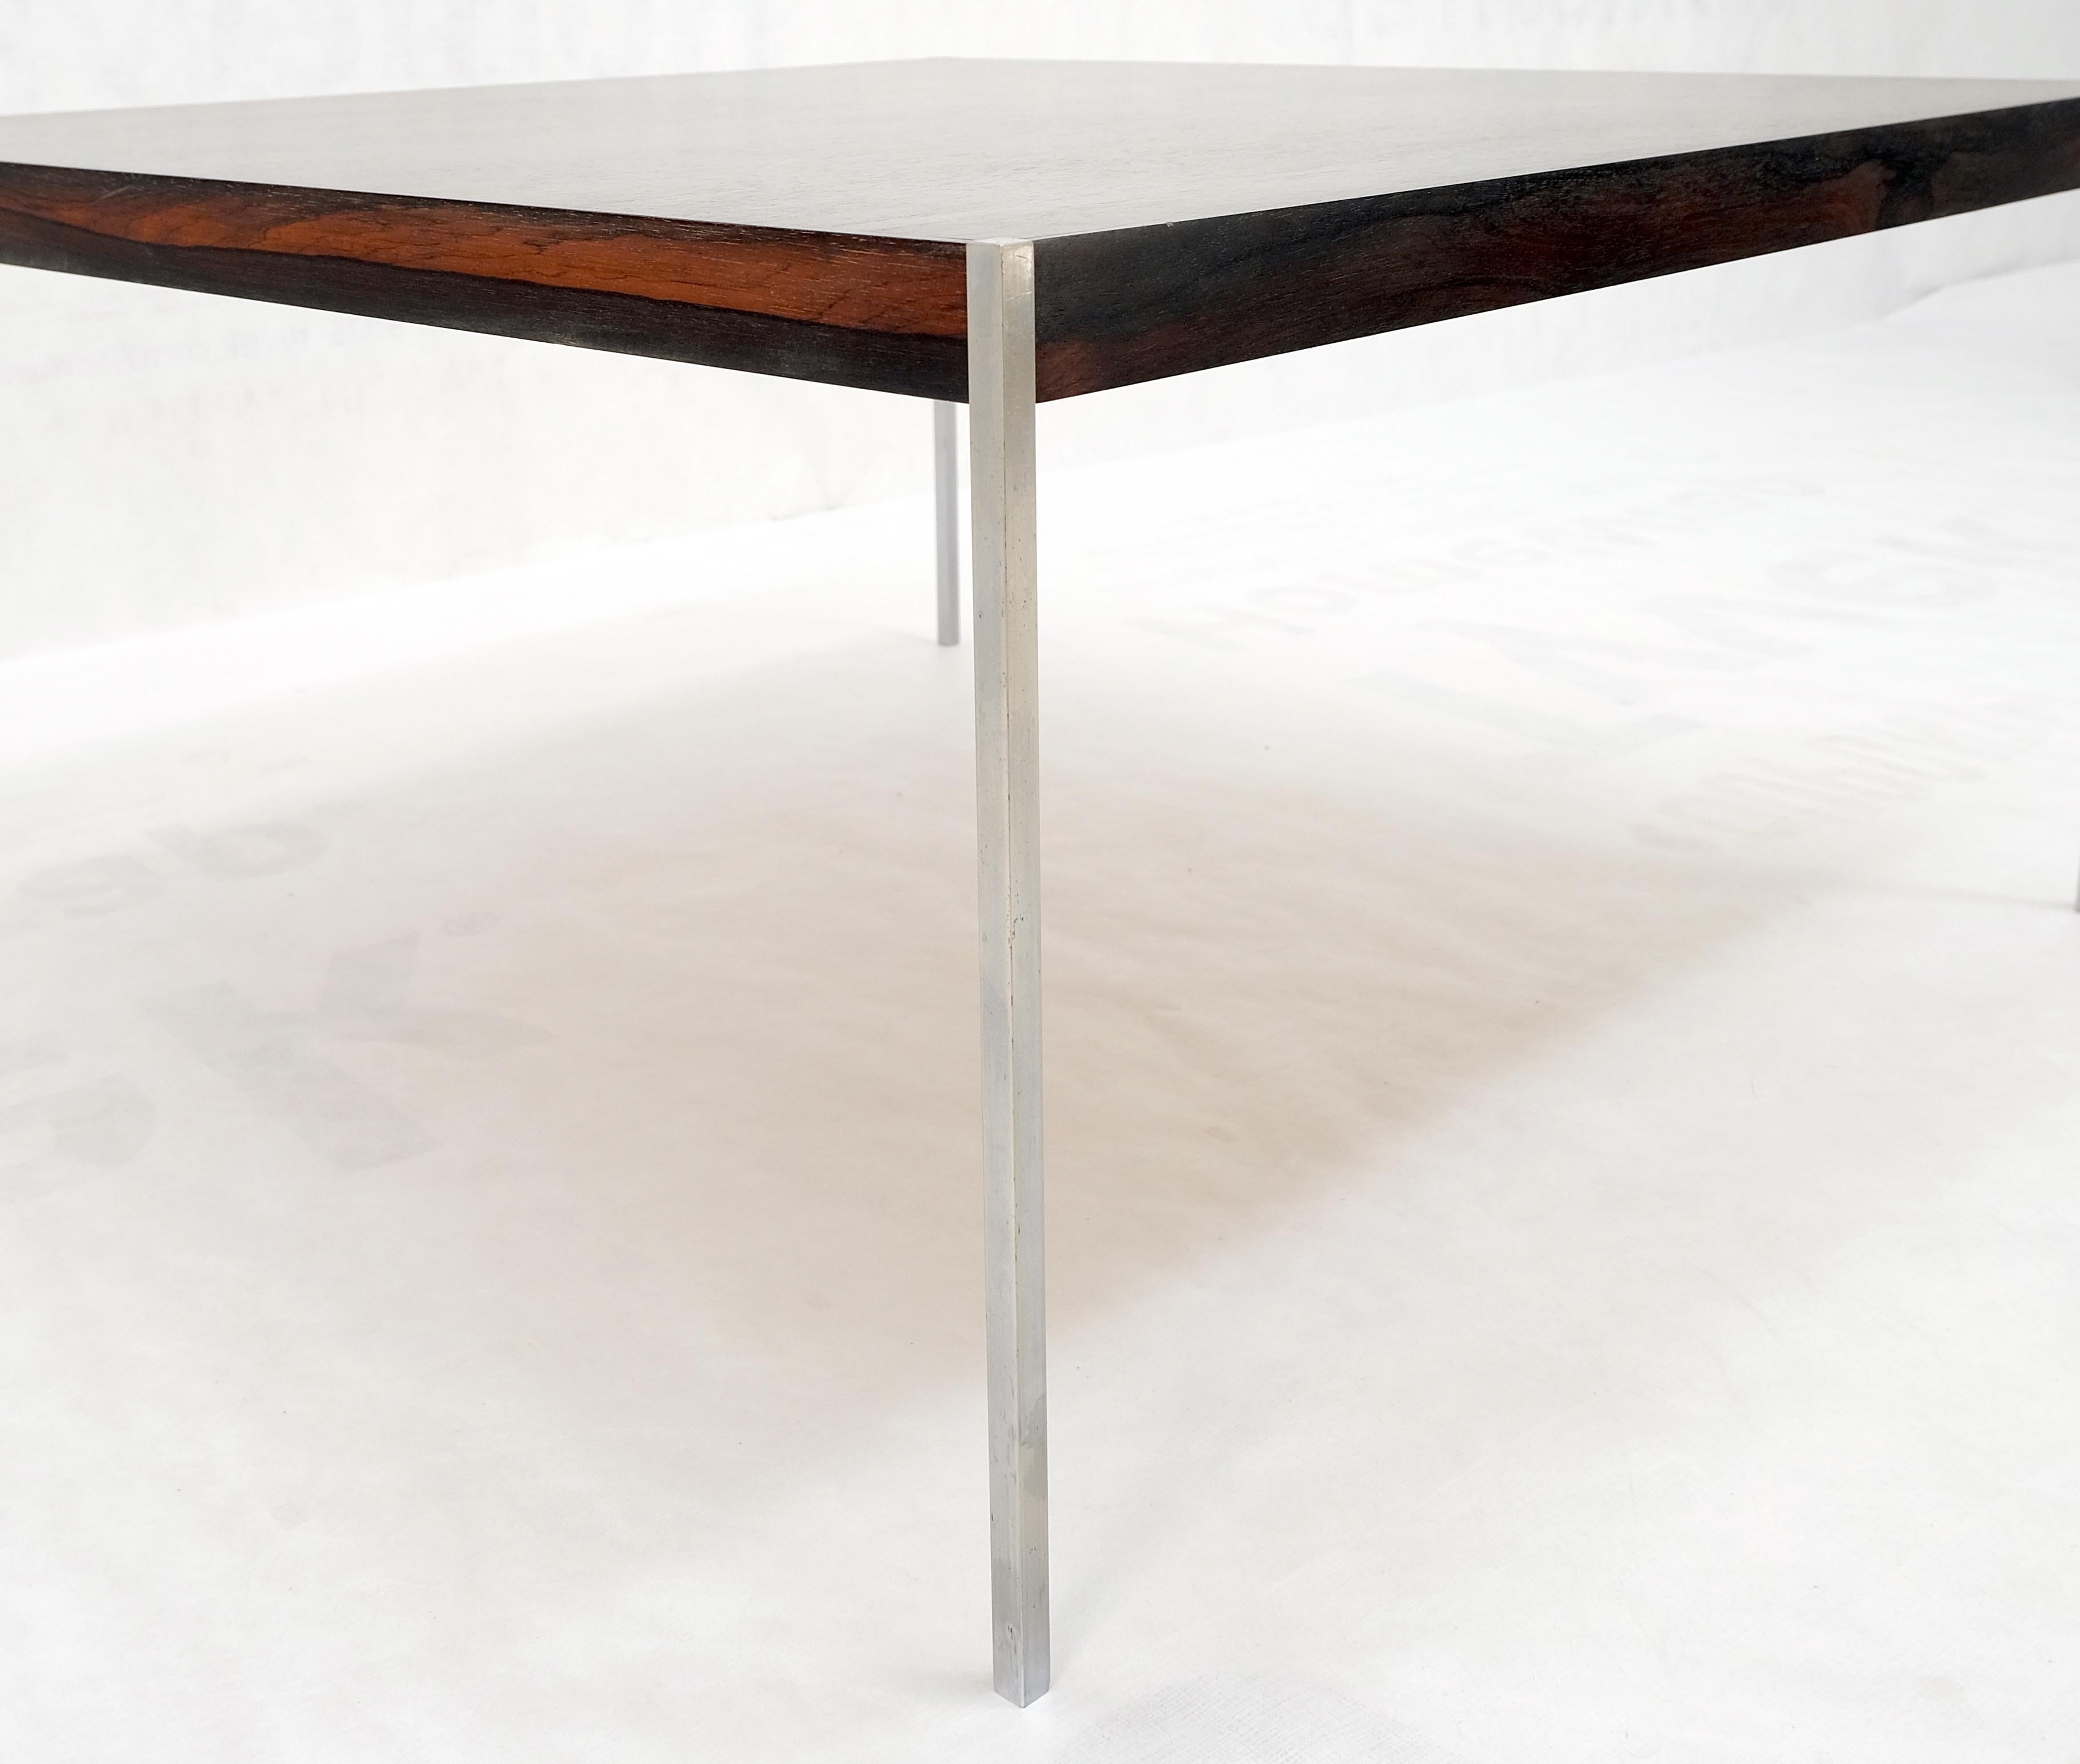 Rosewood Square Top Thin Chrome Square Bar Legs Danish Mid-Century Coffee Table In Good Condition For Sale In Rockaway, NJ